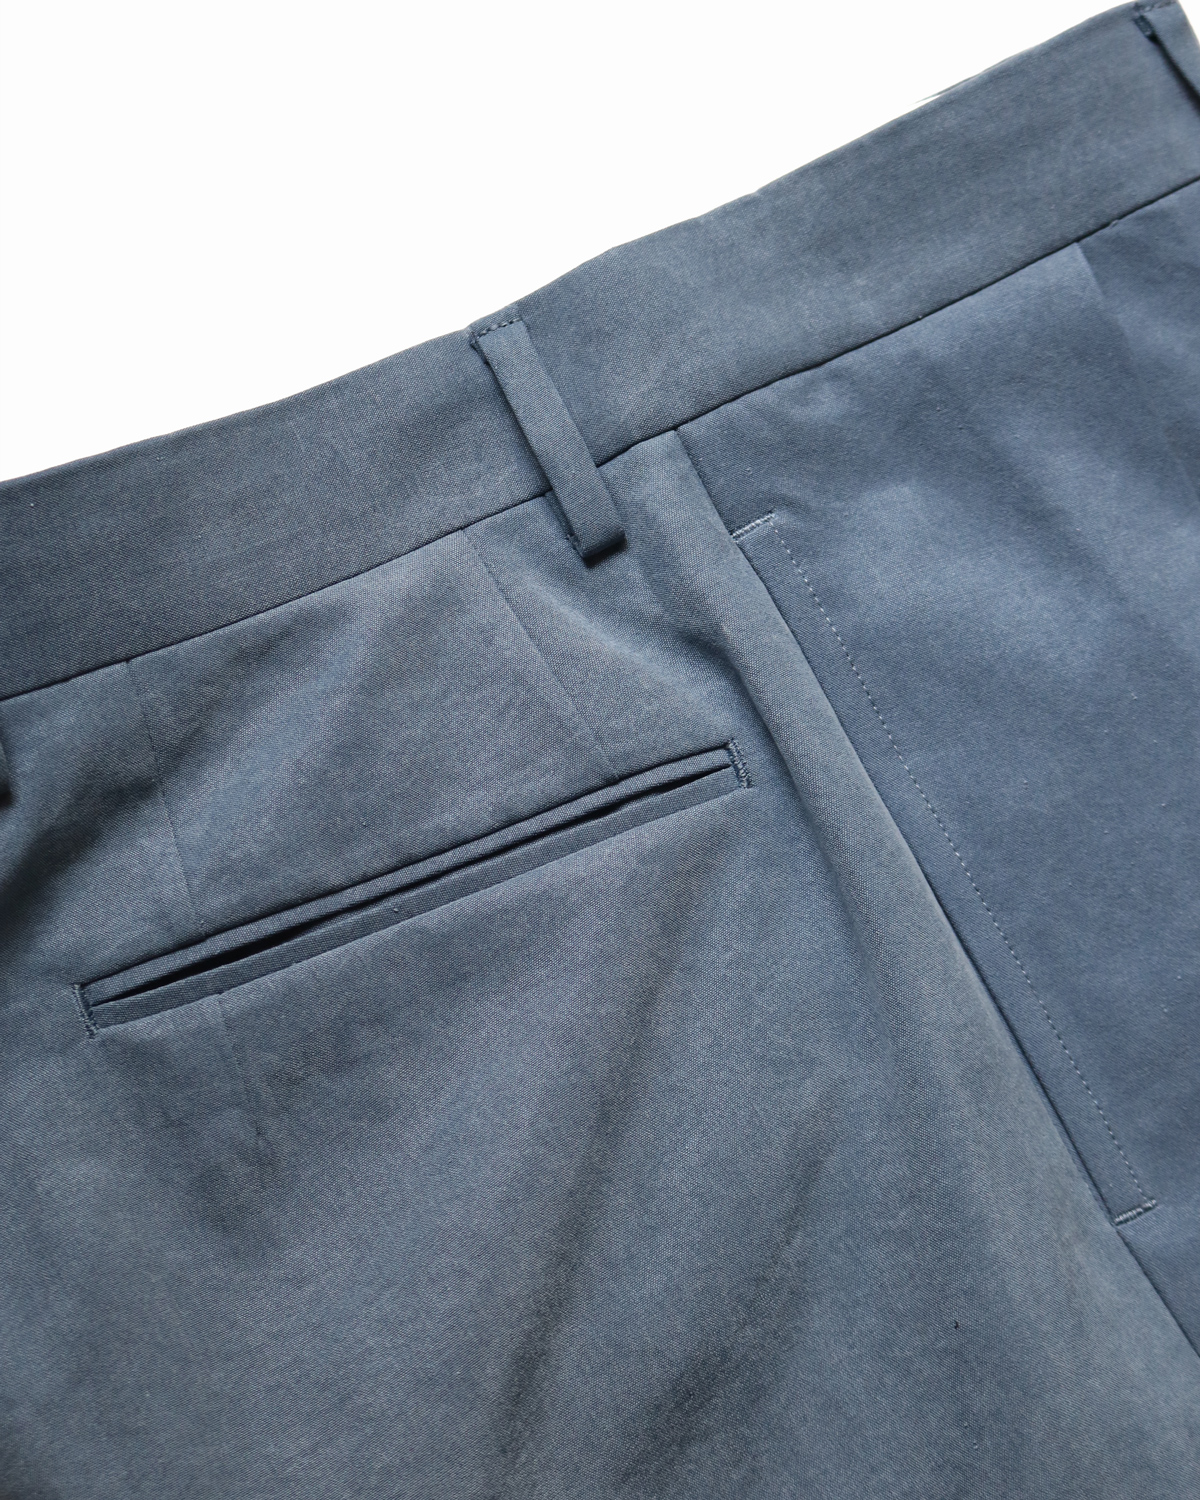 NEAT｜CELLULOSE NIDOM｜WIDE - Blue Gray｜PRODUCT｜Continuer Inc 